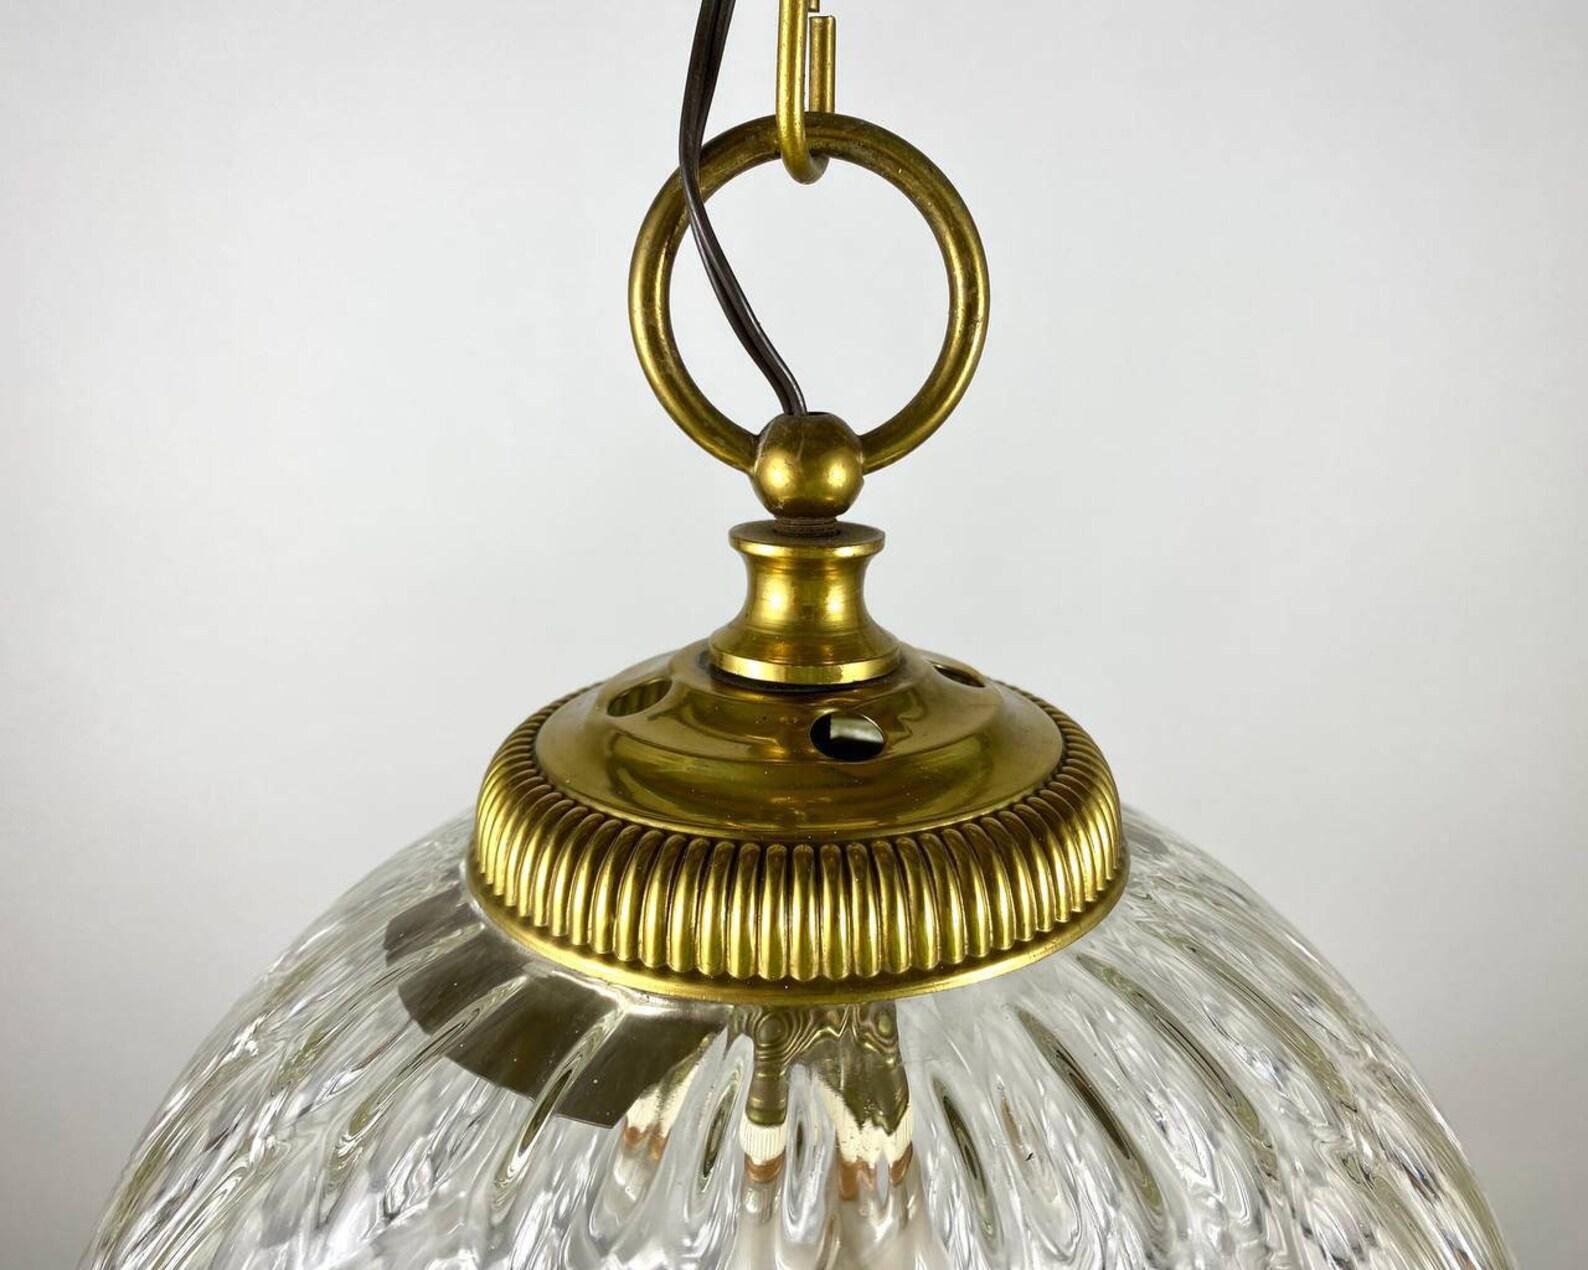 Vintage Chandelier or Lantern Gilt Brass and Textured Glass Suspended Lighting In Excellent Condition For Sale In Bastogne, BE